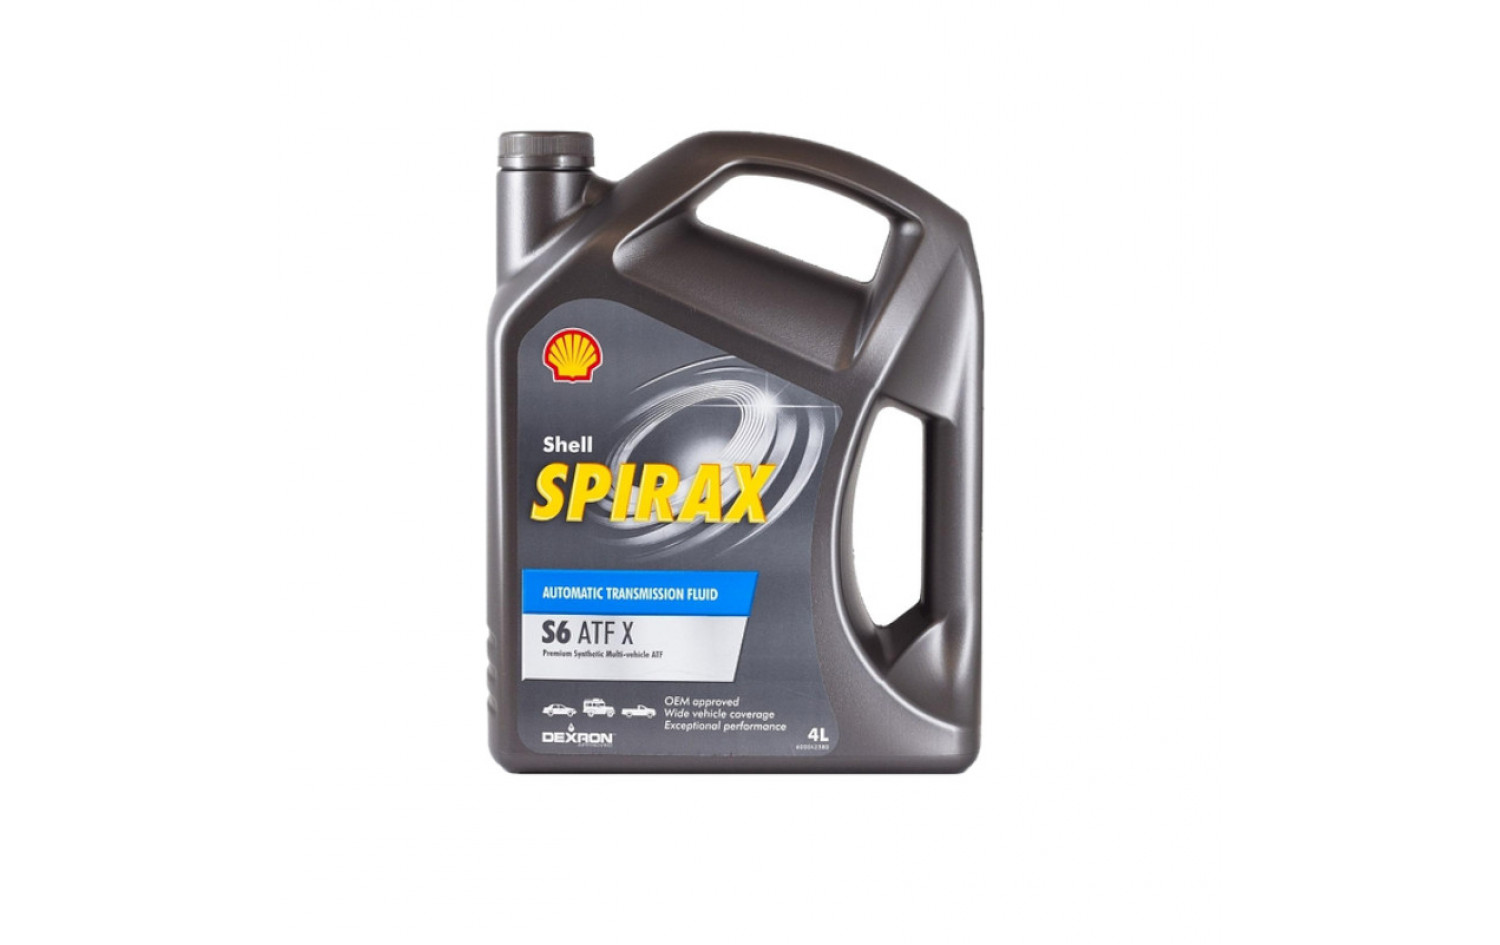 S6 atf x. Масло трансмиссионное Shell Spirax s6 ATF X 4 Л 550048808. Shell Spirax s6 ATF X 4л. 550048808 - Shell Spirax s6 ATF X 4l. Трансмиссионное масло Shell Spirax s6 ATF X 4l.